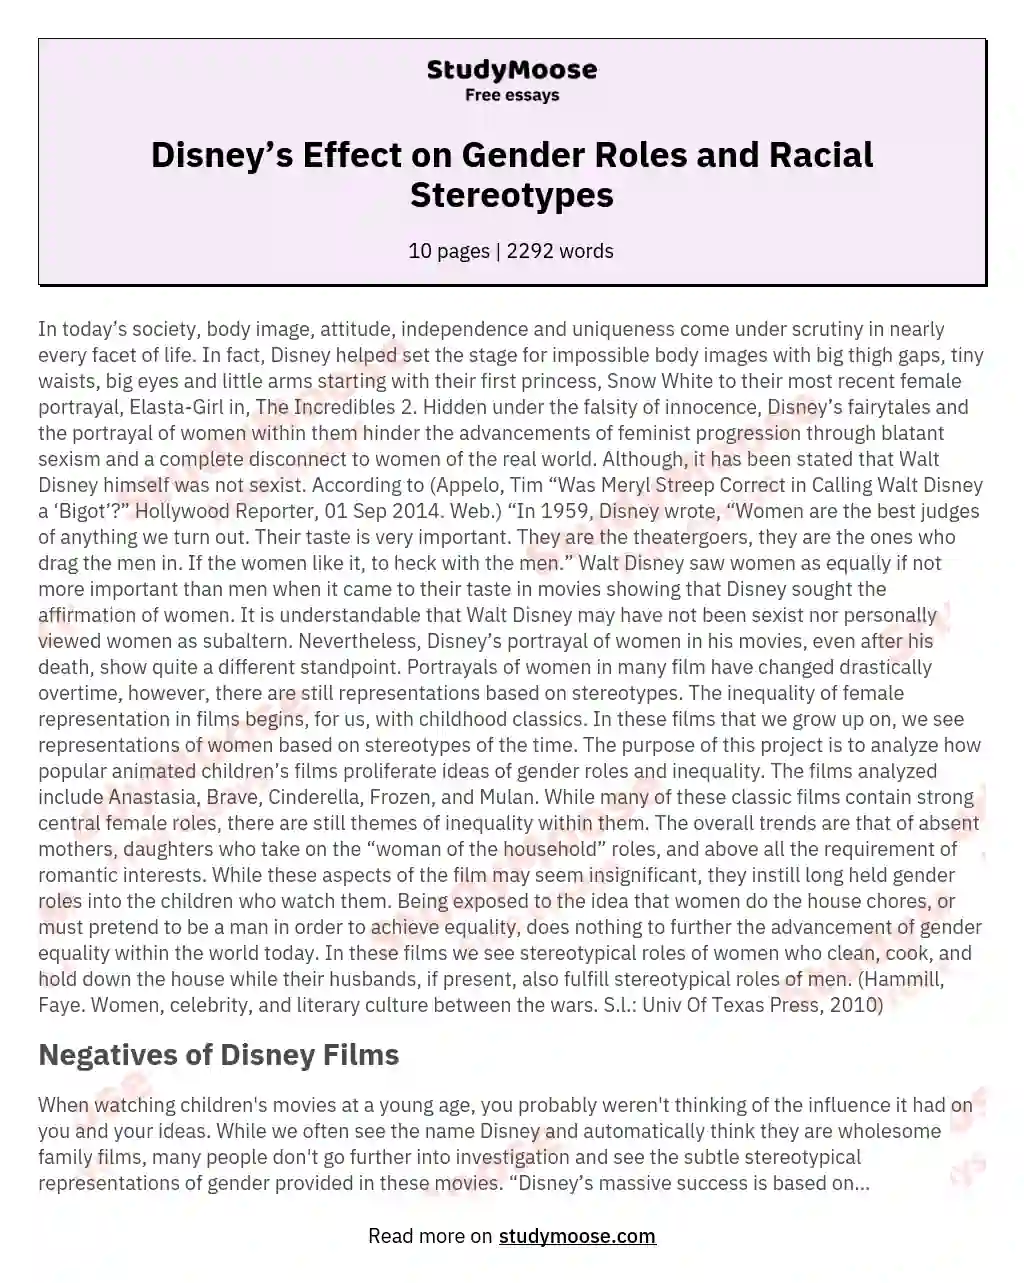 Disney’s Effect on Gender Roles and Racial Stereotypes